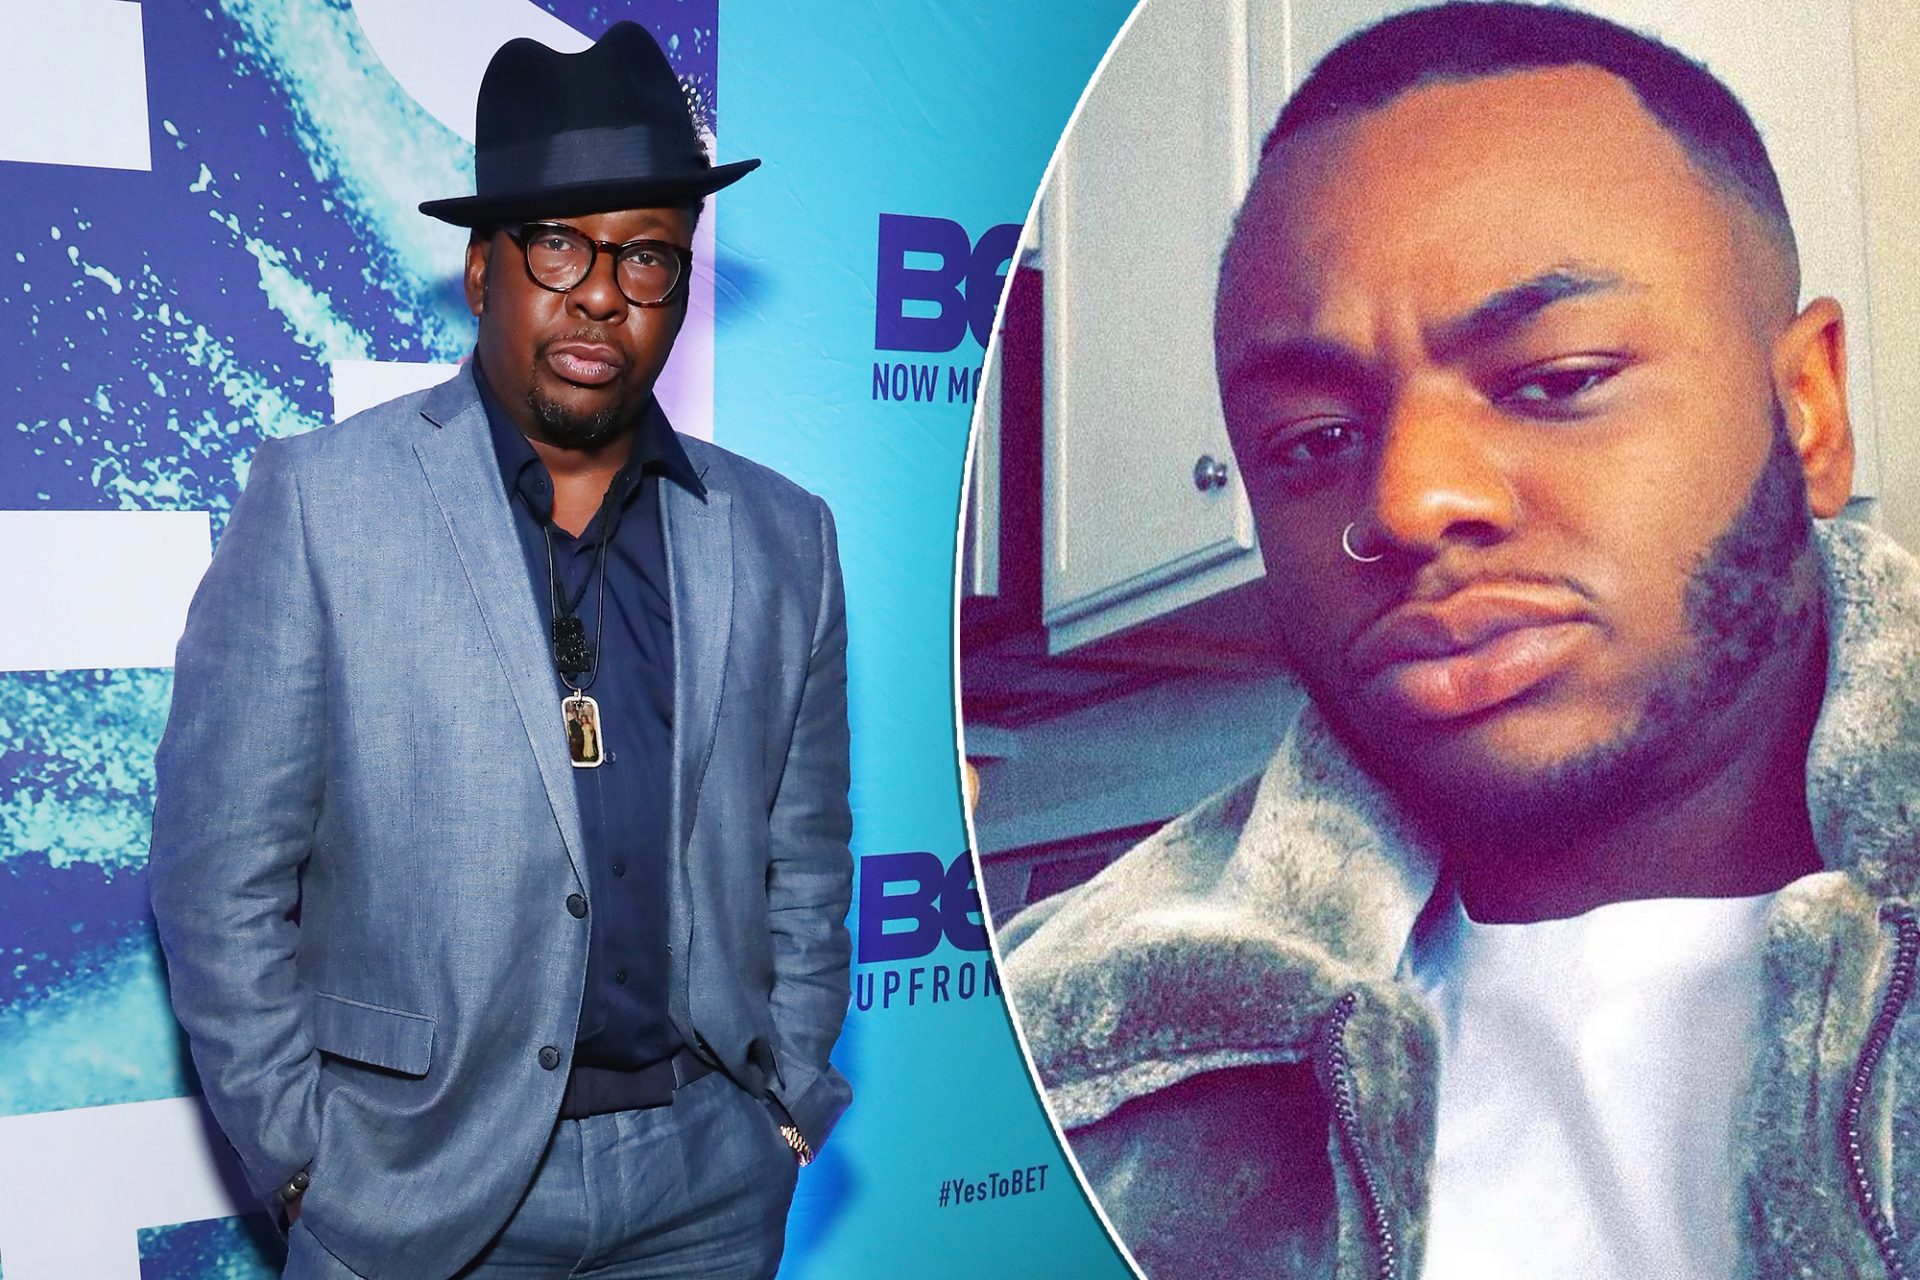 Bobby Brown says son Bobby Jr. correct ‘experimented’ with treatment before death